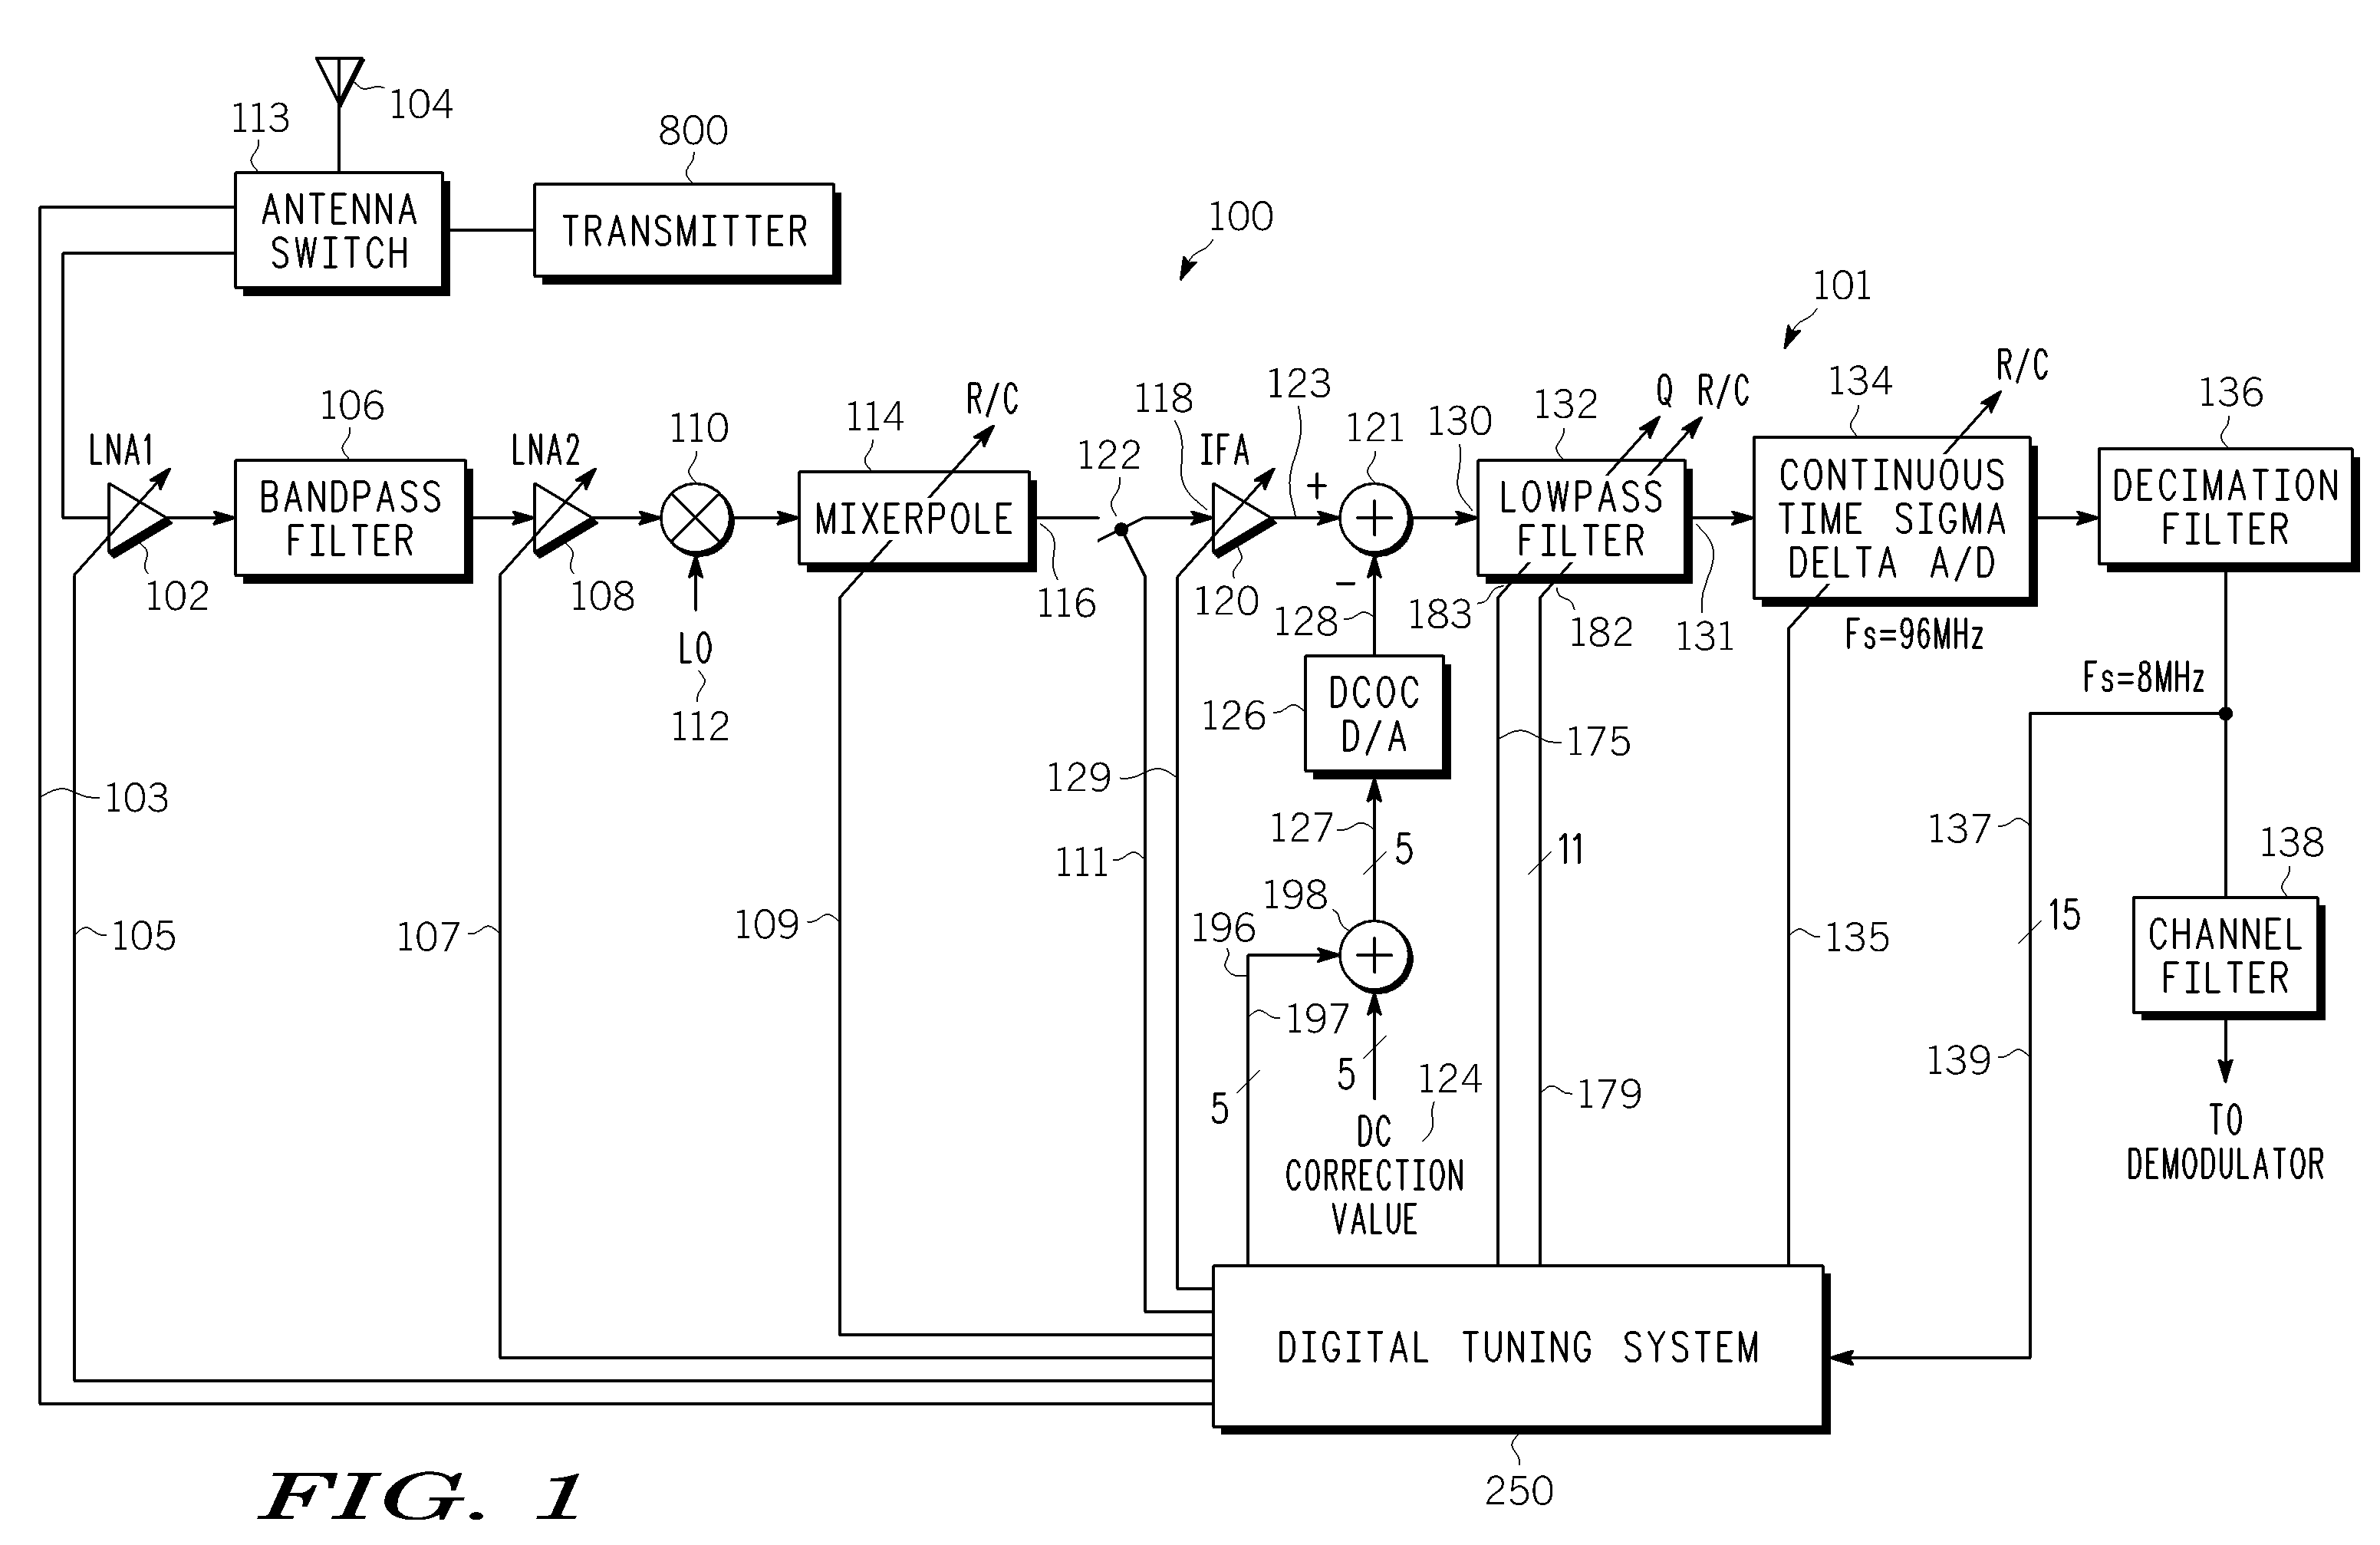 Controlling the bandwidth of an analog filter